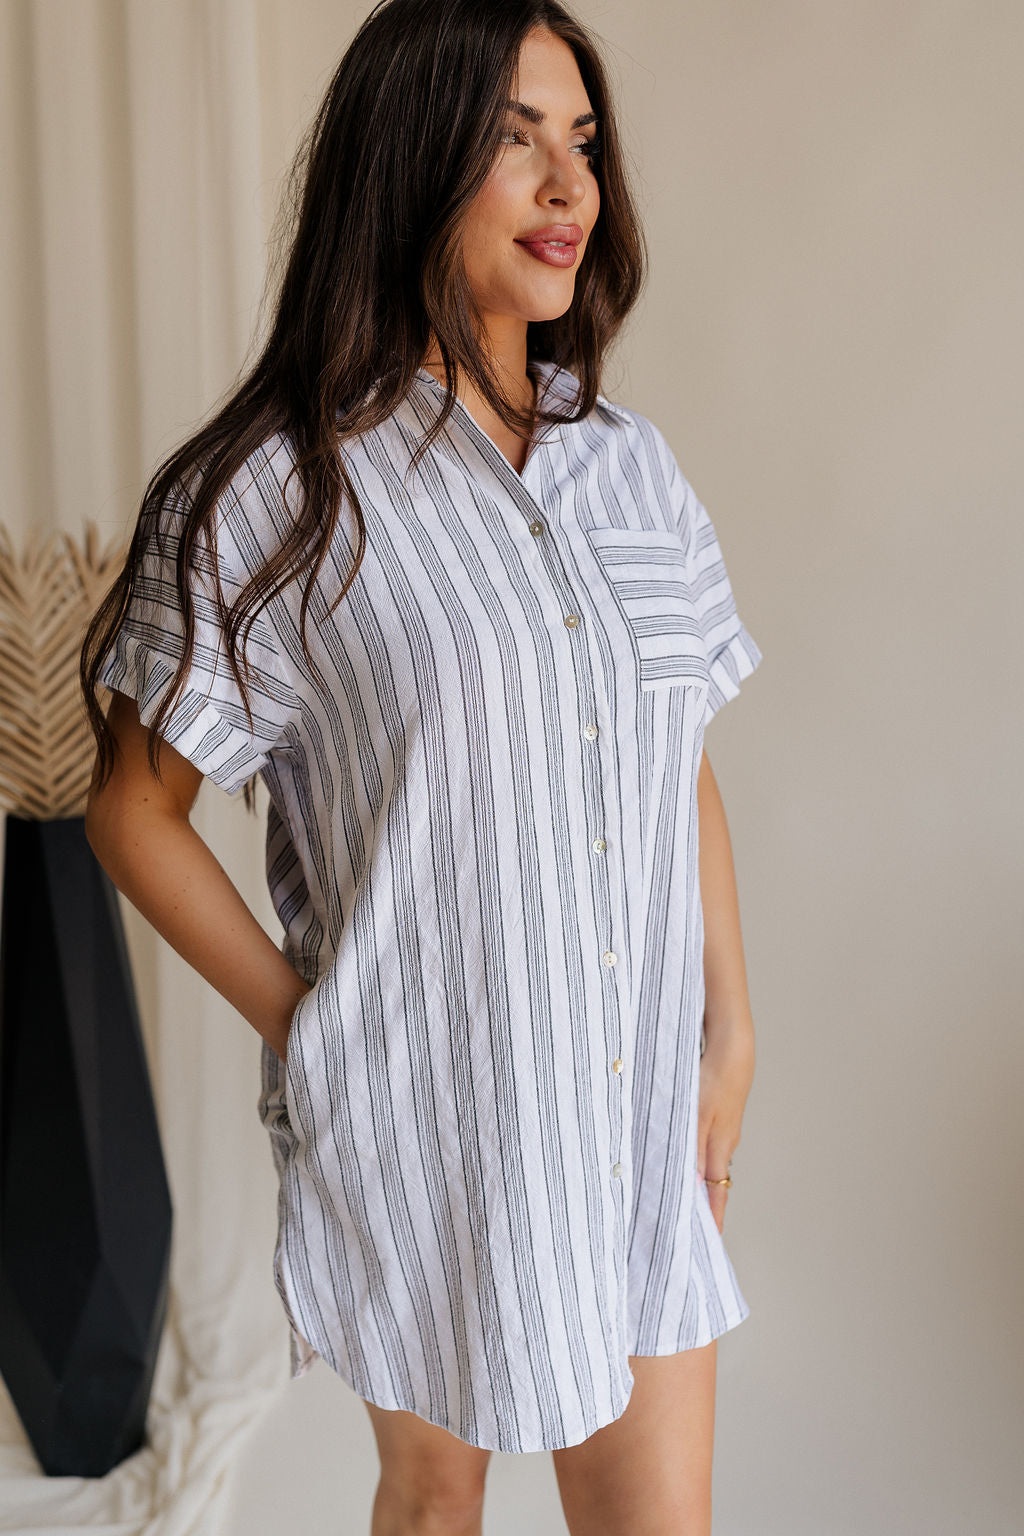 Frontal side view of female model wearing the Jenna White & Black Striped Mini Dress that has white fabric with vertical black stripes, a front pocket, button up front, short sleeves, and collar.